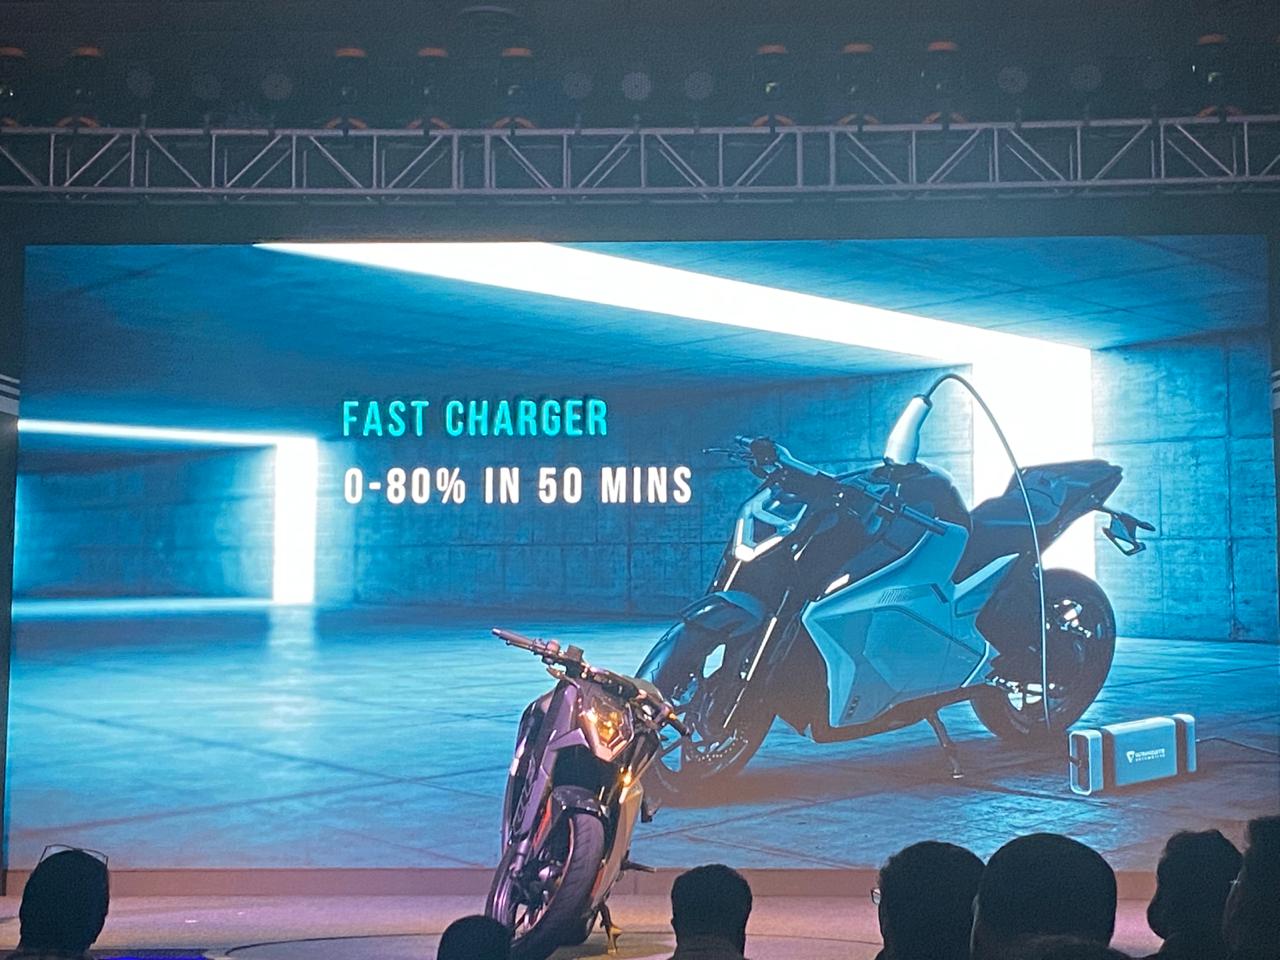 <p>The fast charger charges the batter up to 80 per cent in 50 mins.</p>